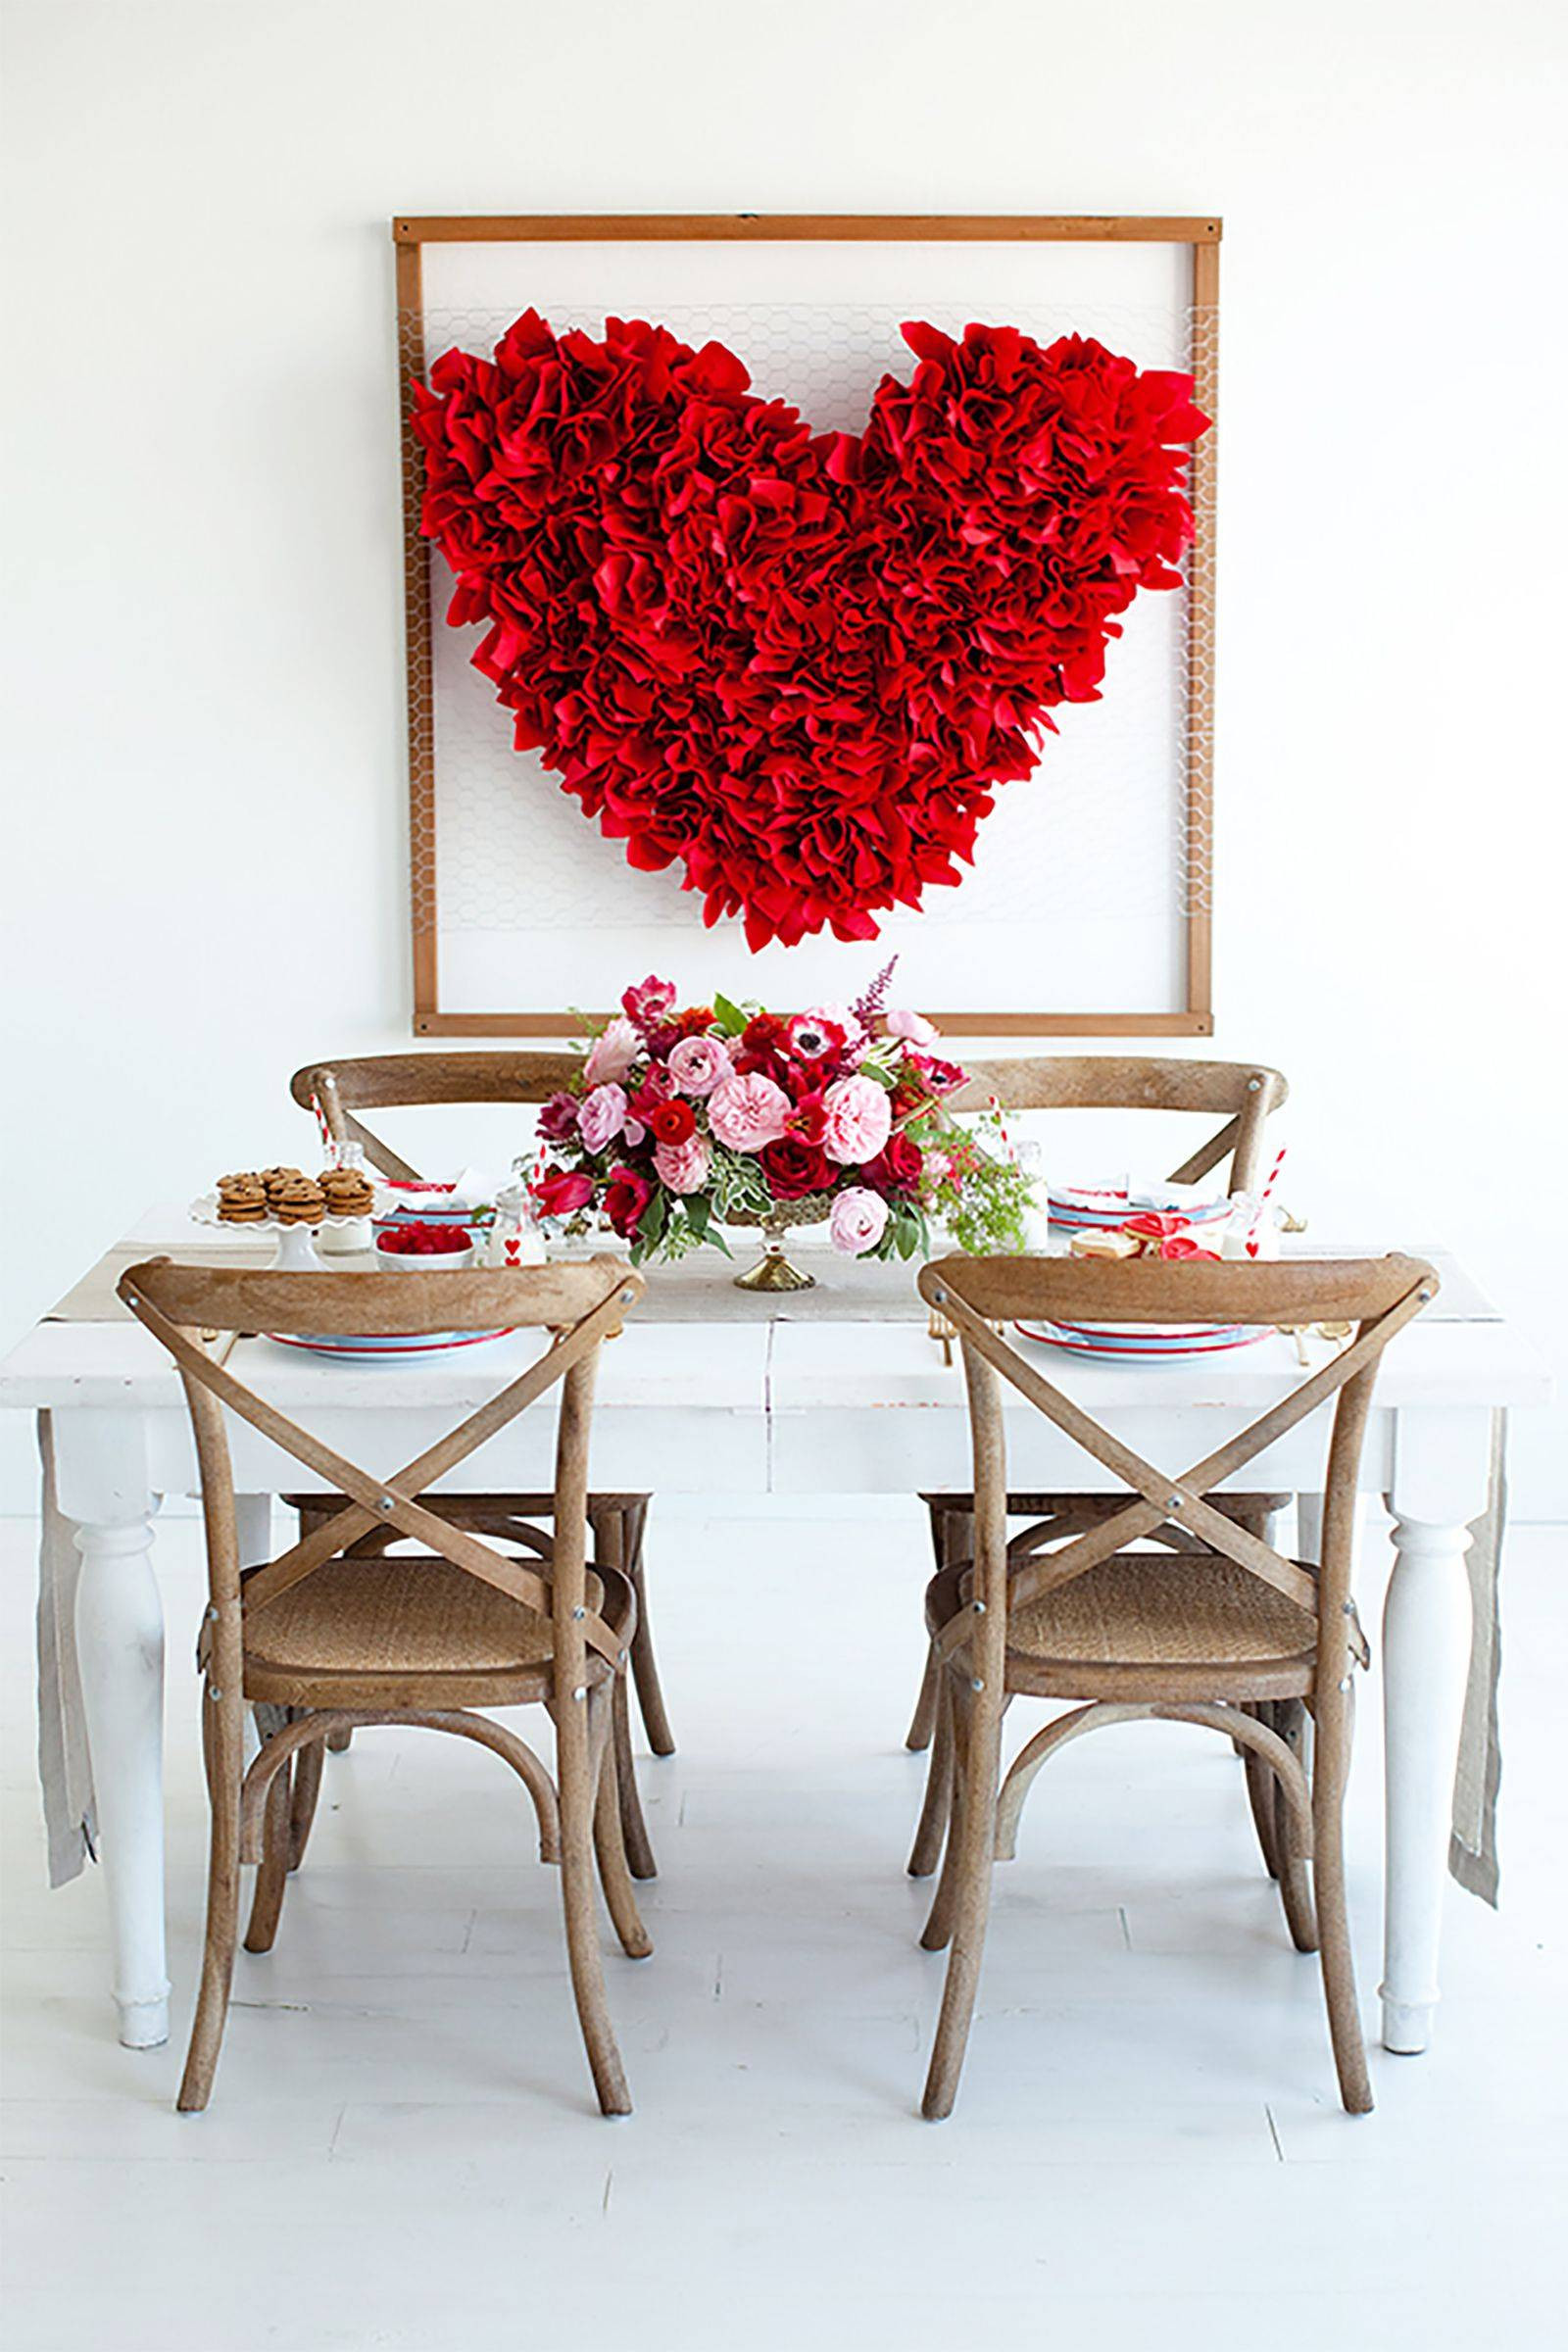 Valentines Day Room Ideas
 Decoration Dining Room for Romantic Valentine Day